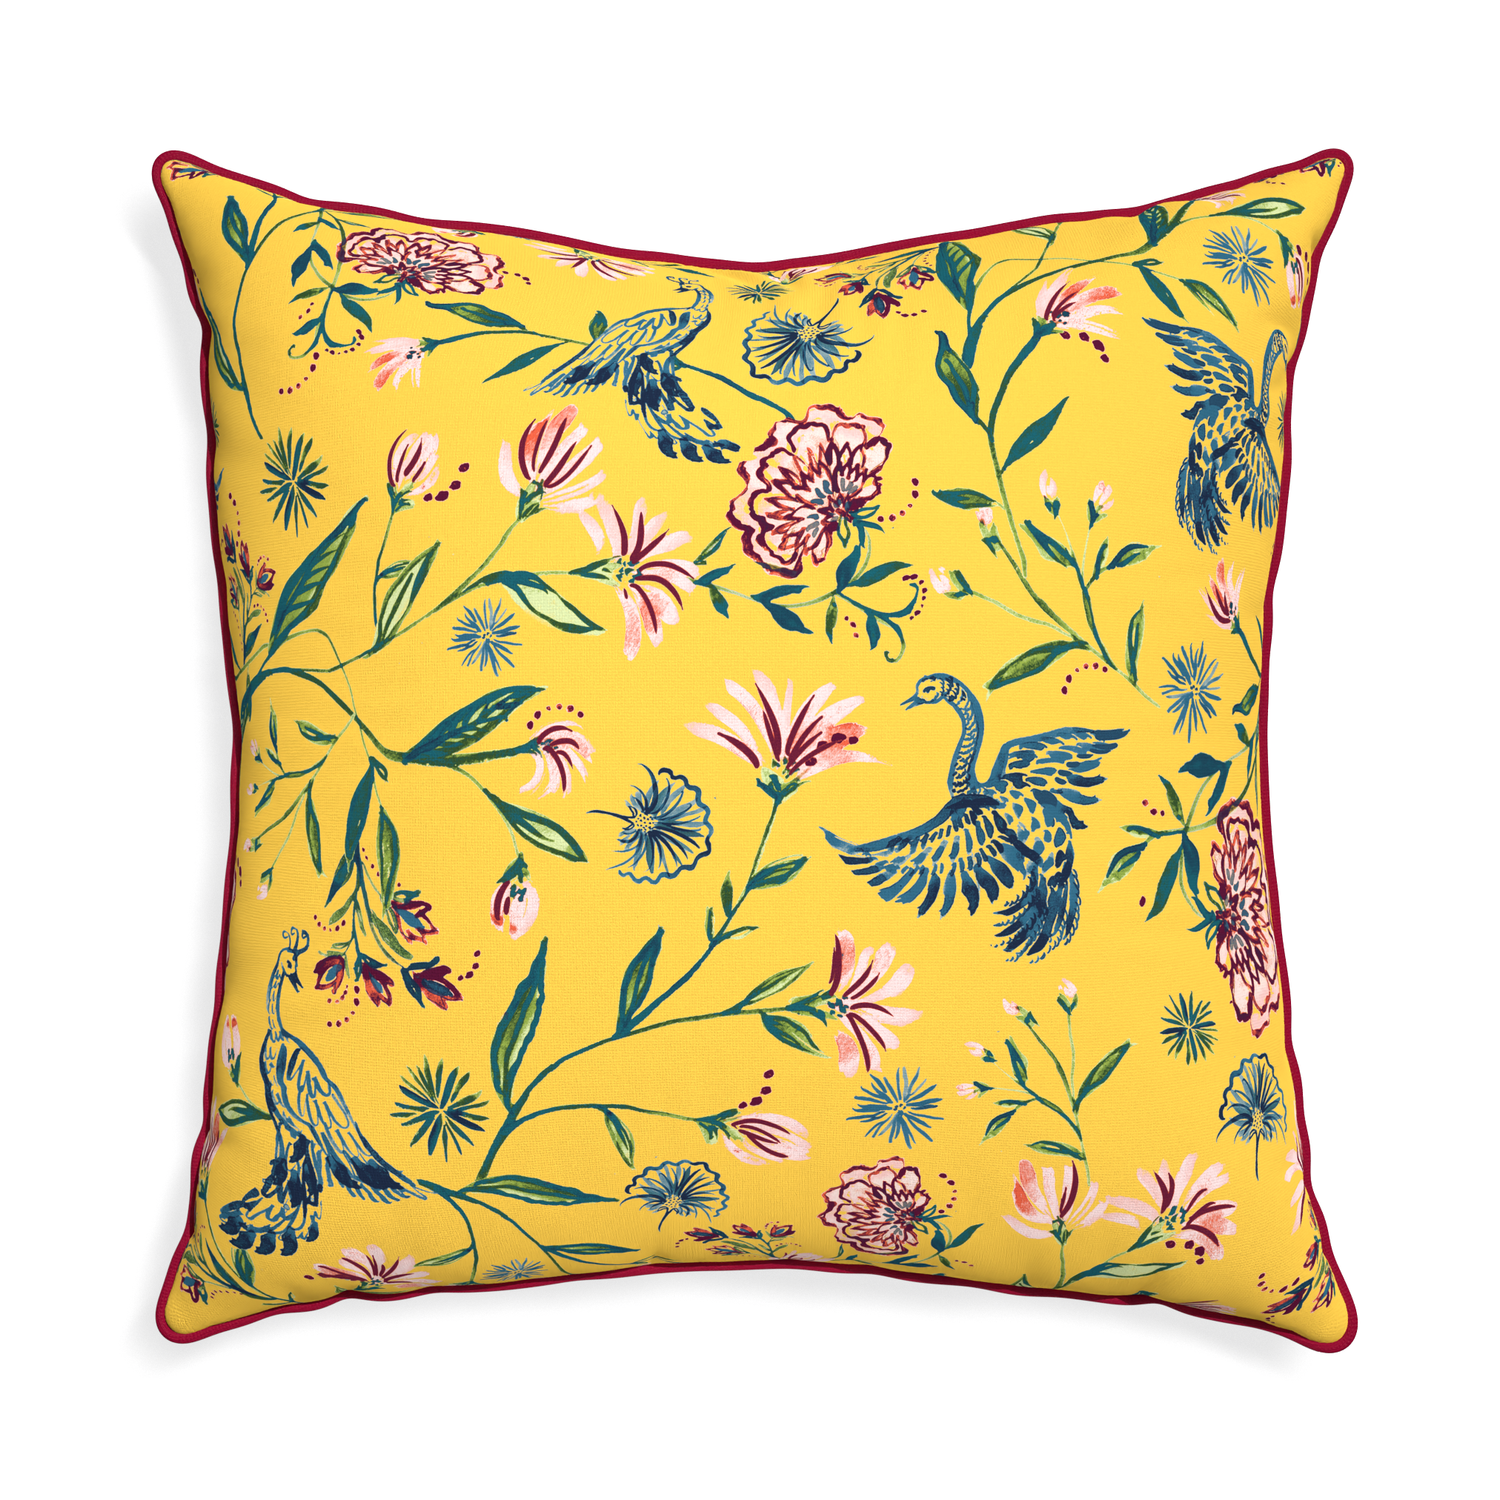 Euro-sham daphne canary custom pillow with raspberry piping on white background